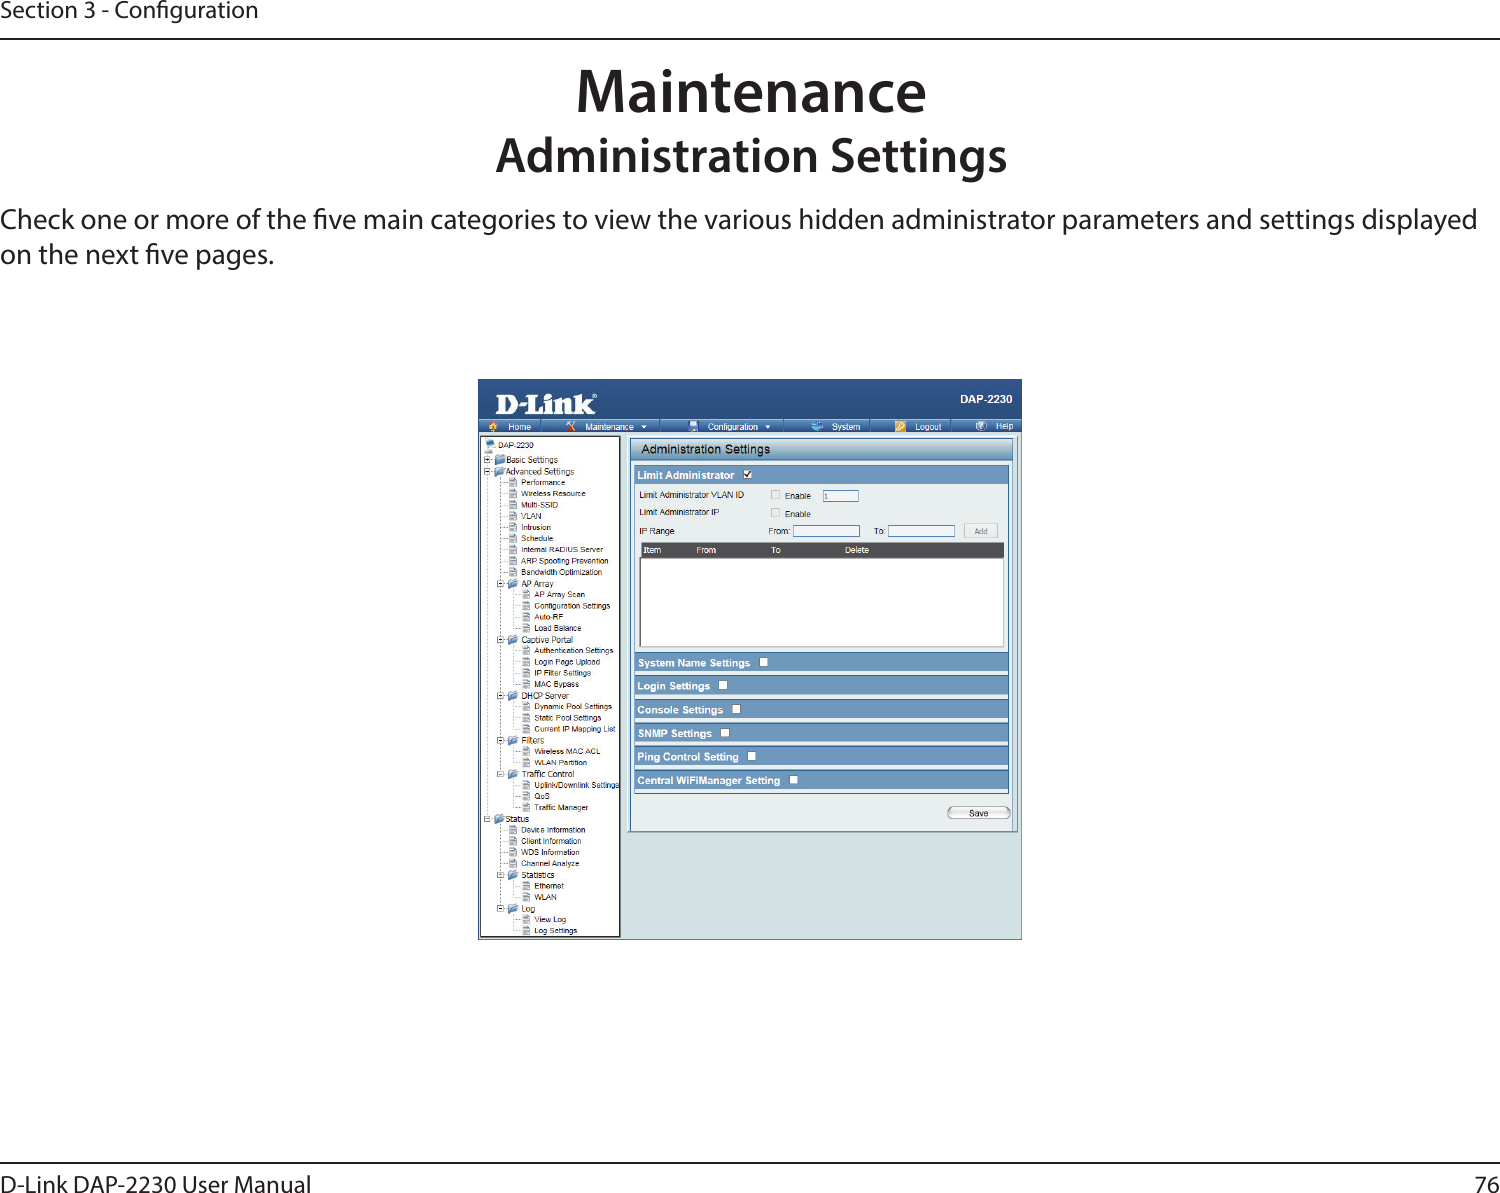 76D-Link DAP-2230 User ManualSection 3 - CongurationCheck one or more of the ve main categories to view the various hidden administrator parameters and settings displayed on the next ve pages.Maintenance Administration Settings